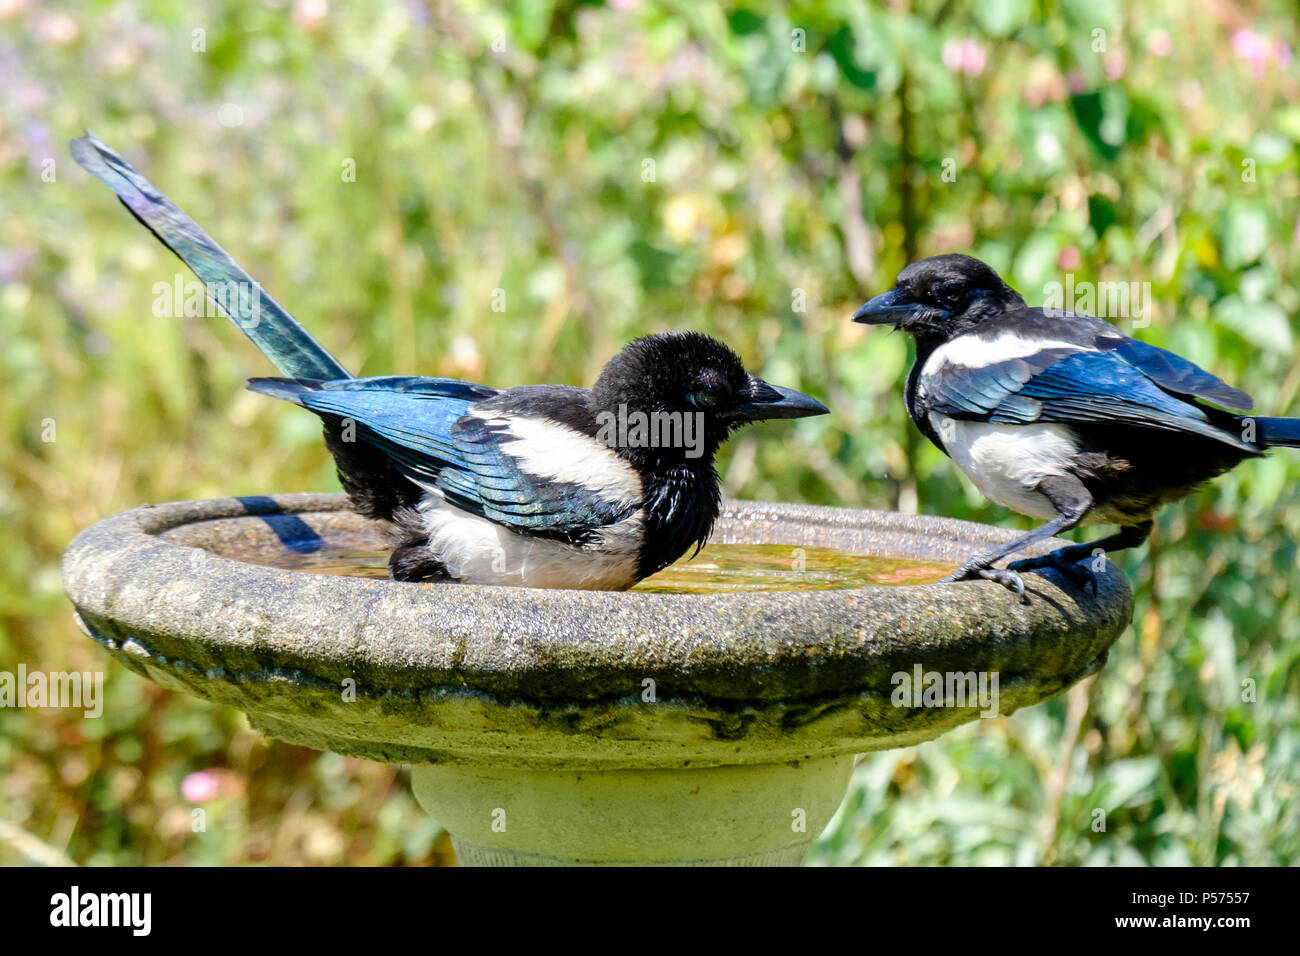 Young magpies cool off in a garden birdbath on a hot day. London UK. Stock Photo